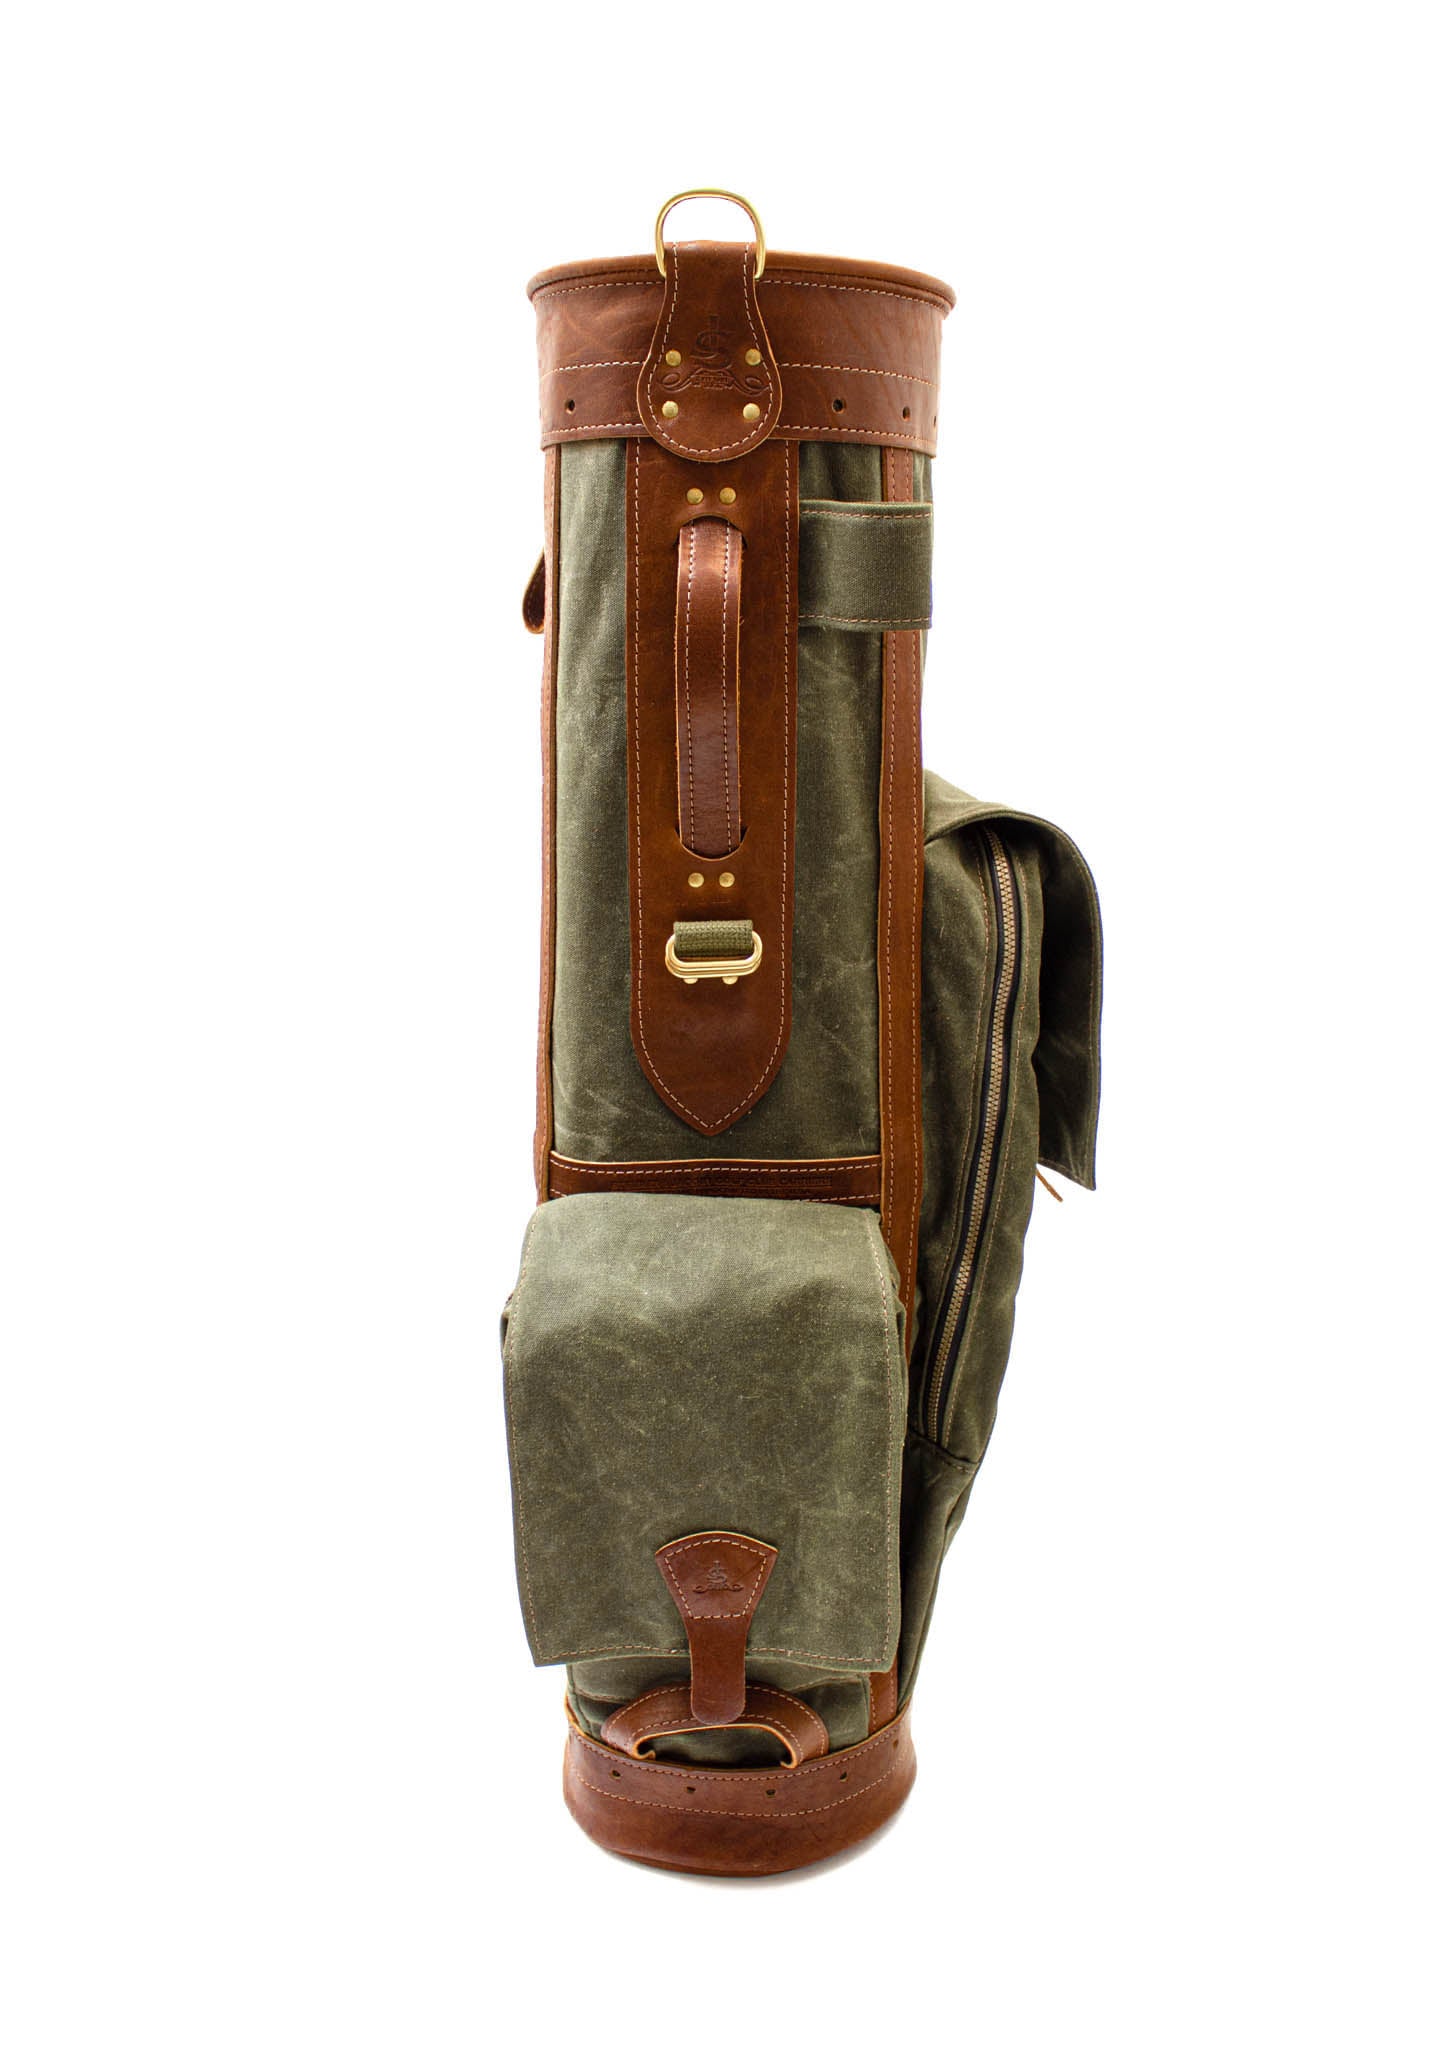 8" Airliner Style Golf Bag- Olive Waxed Canvas & Chestnut Leather- Steurer & Jacoby